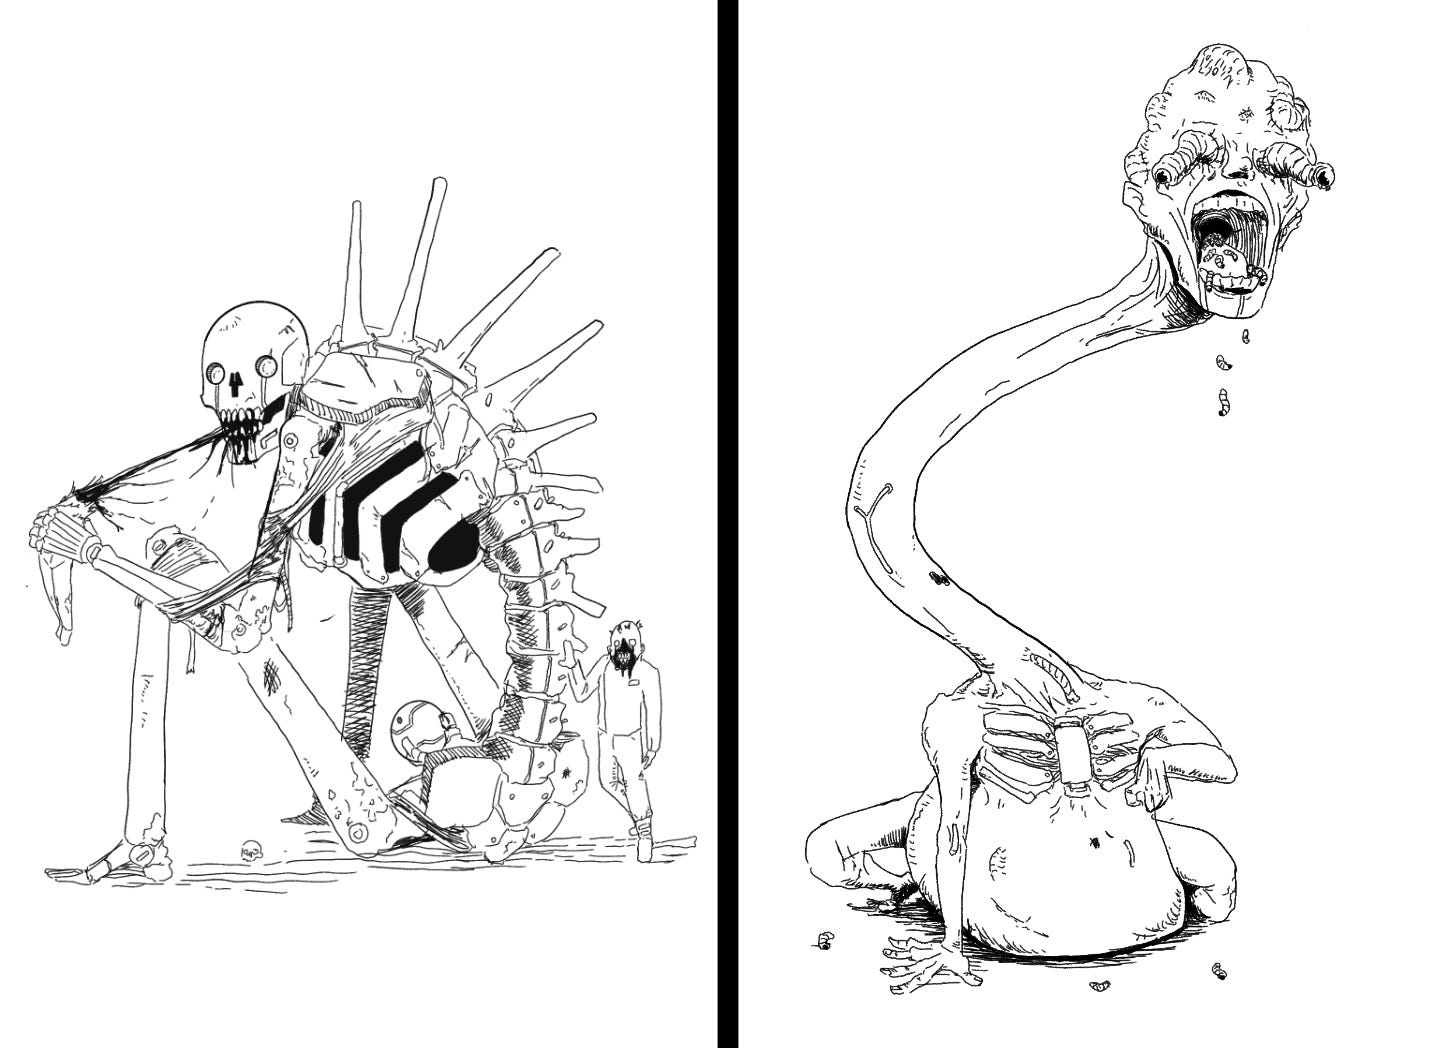 Two illustrations. A giant robo-skeleton eating a dude. A creepy genderless and nude humanoid with a long neck.